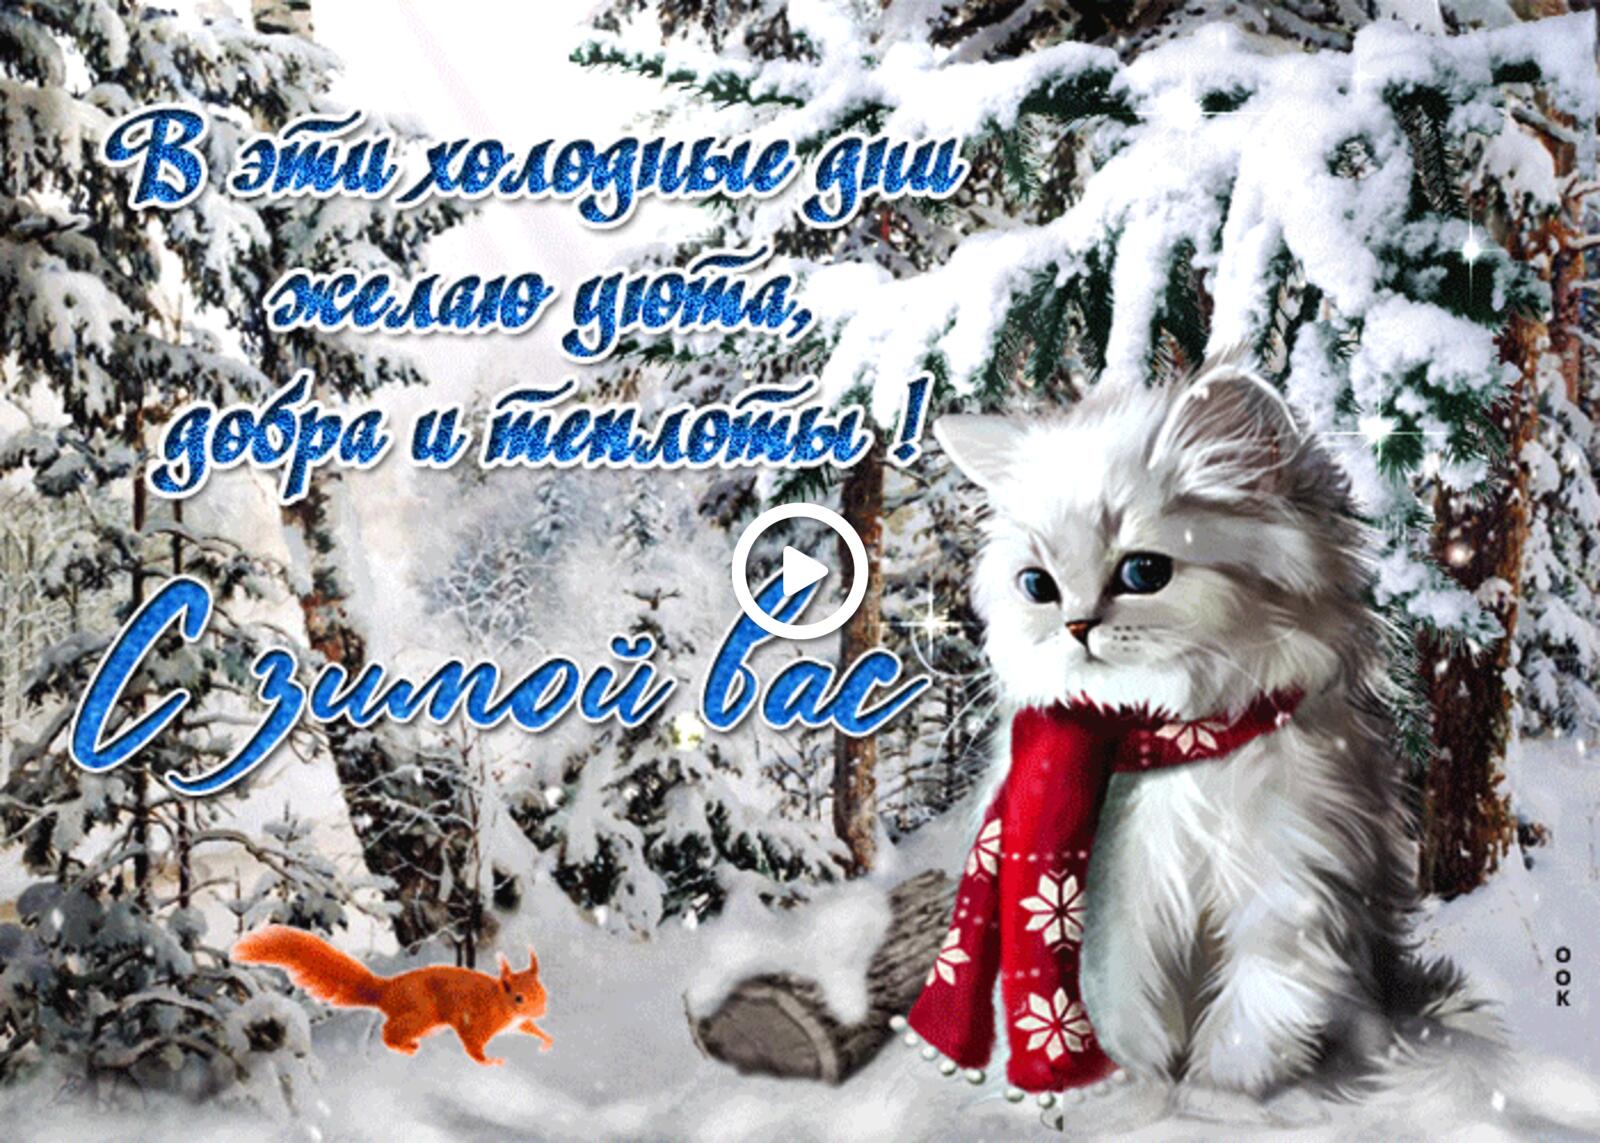 A postcard on the subject of with winter you kindness and warmth snow for free